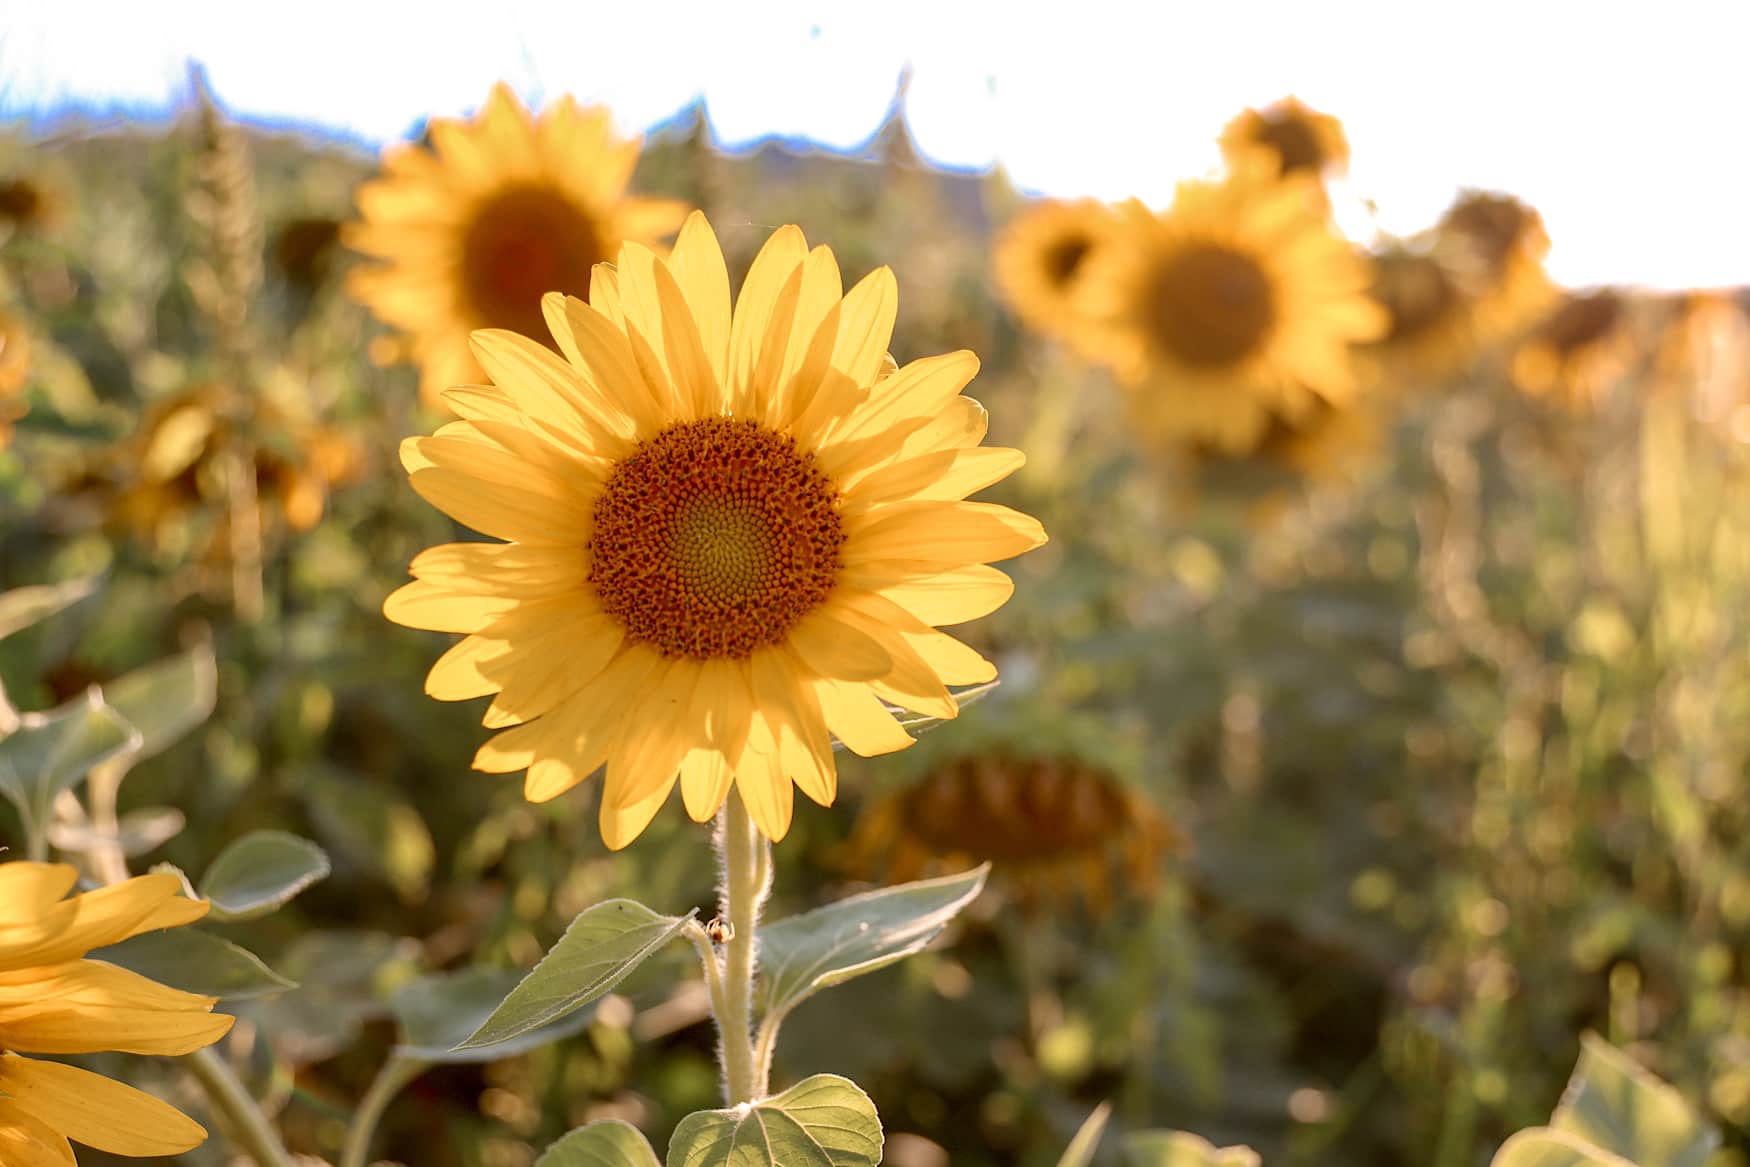 What To Do With Sunflowers At The End Of The Season